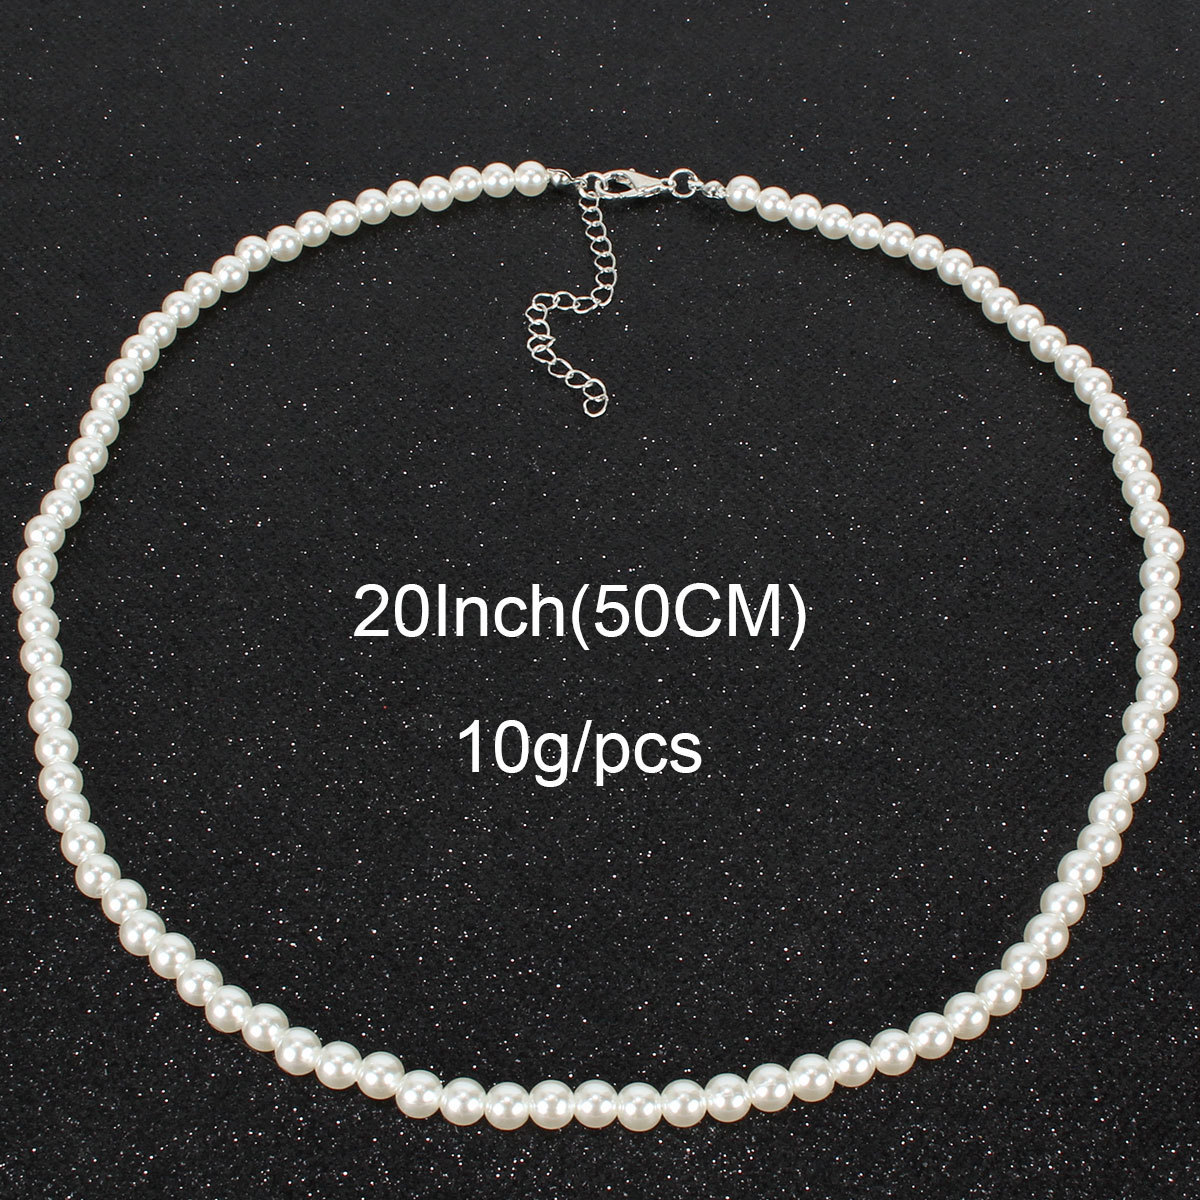 Fashionable And Versatile Near Round Imitation Pearl Necklace Neck Chain Female Clavicle Chain-3